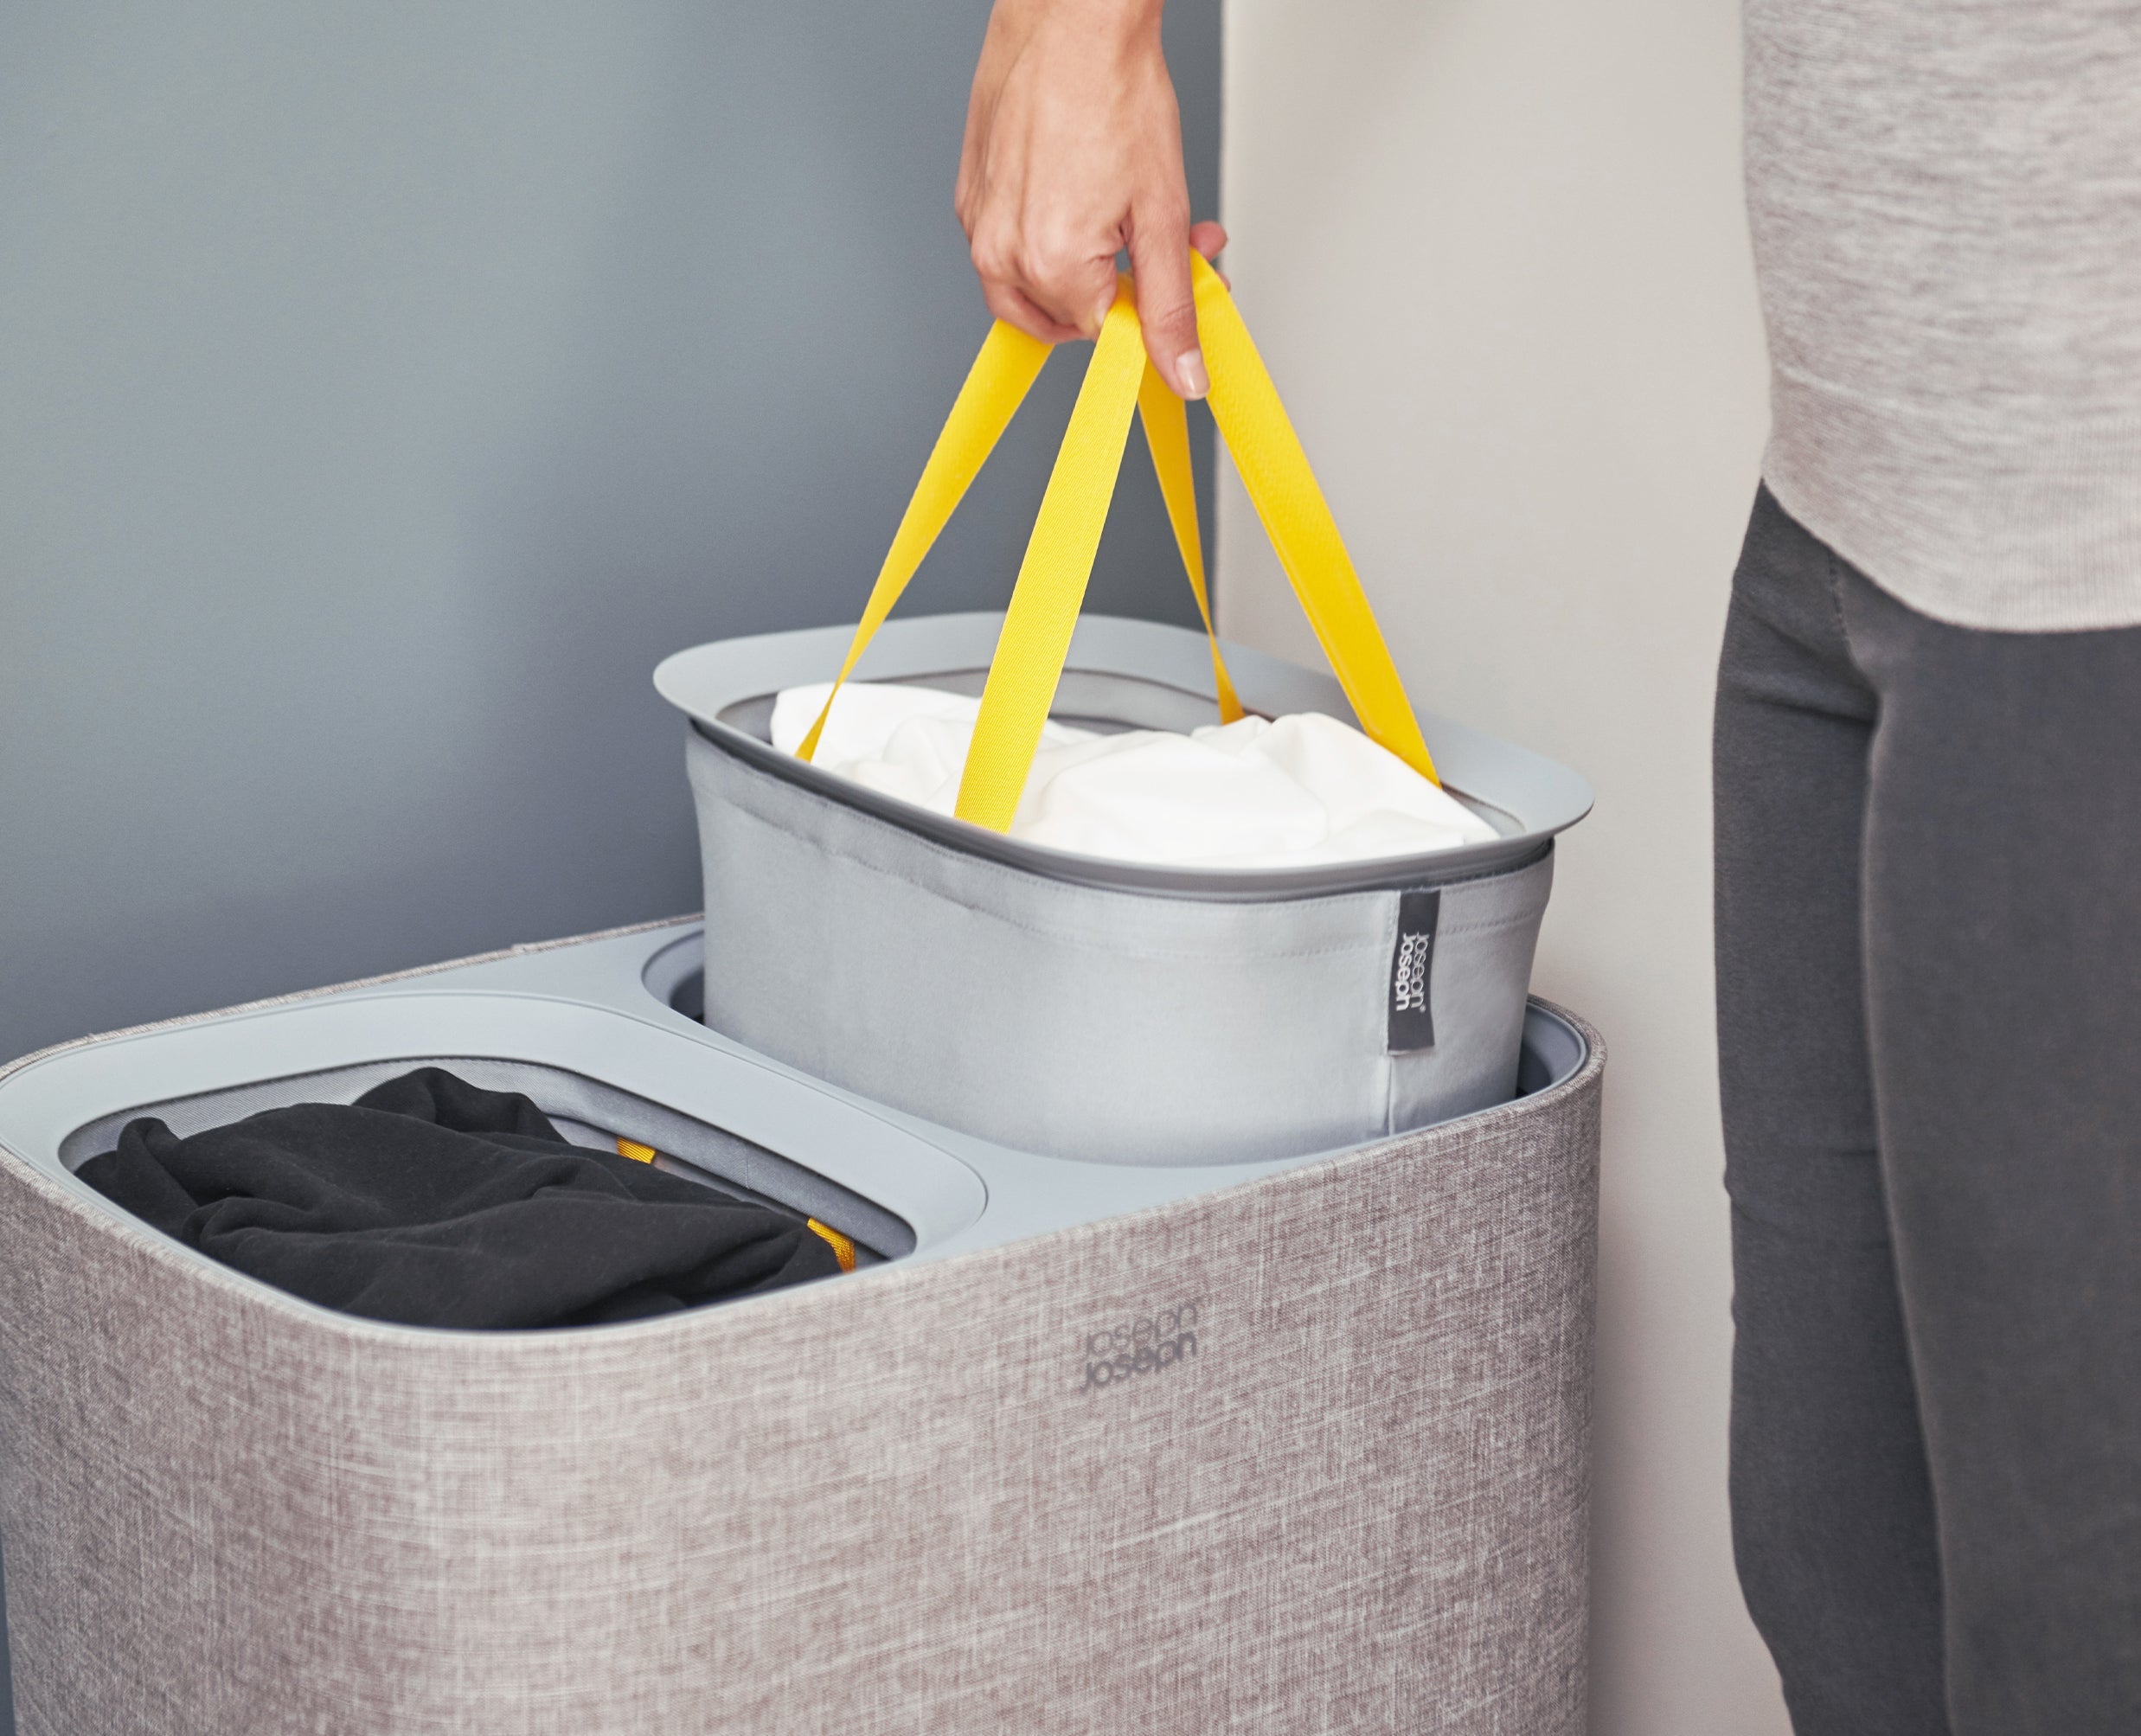 BEON.COM.AU Product Details Separate your lights and darks as you go with the two compartments of this handy laundry basket, meaning you're all ready to go on wash day.  Dual 45-litre compartments for easy separation of fabrics Removable tote bags with easy-carry handles Helper handle on base of bags mak... Joseph Joseph at BEON.COM.AU